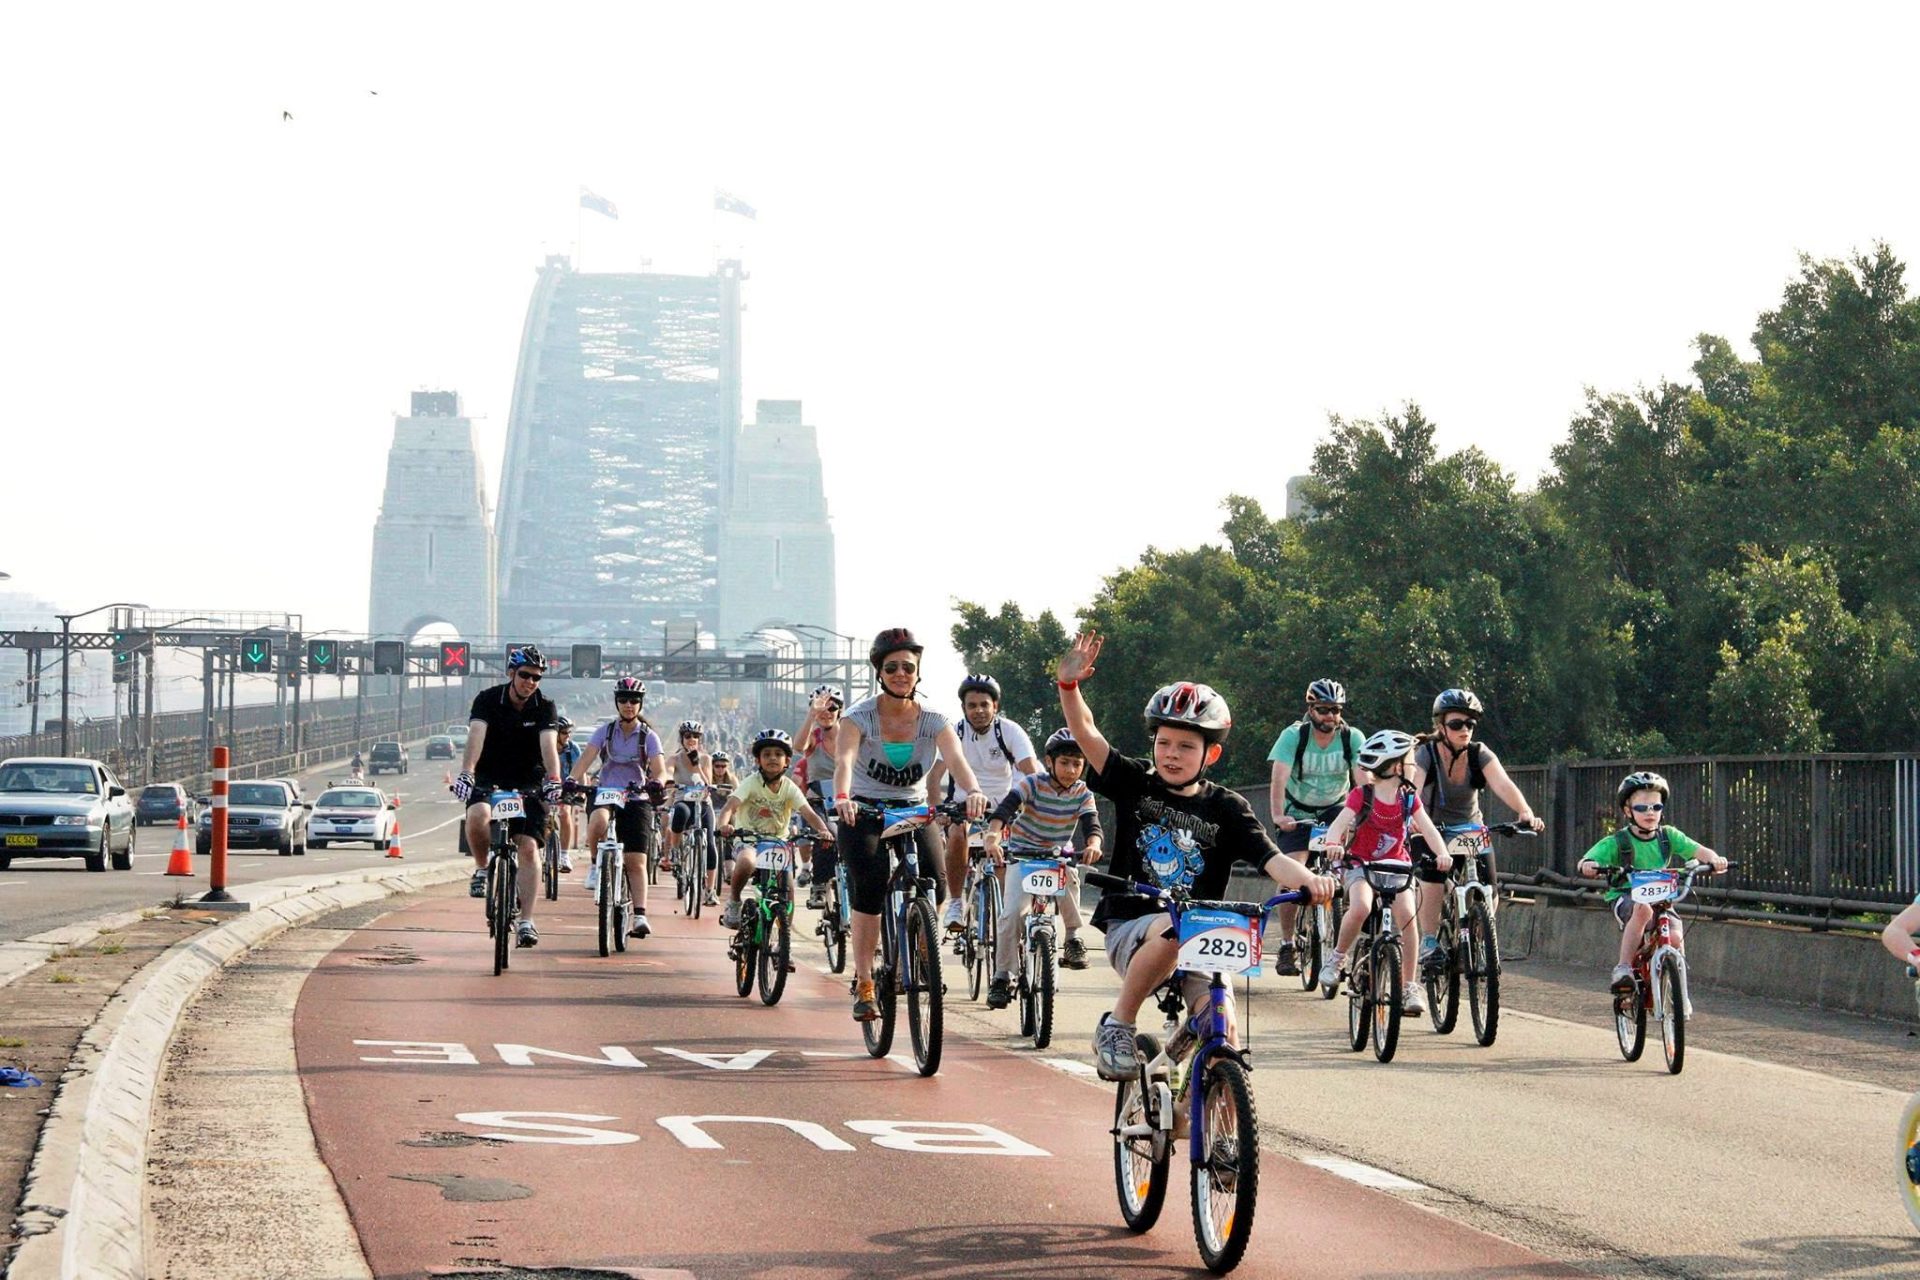 A group of cyclists, of all ages, ride on a closed road with the Sydney Harbour Bridge in the background.